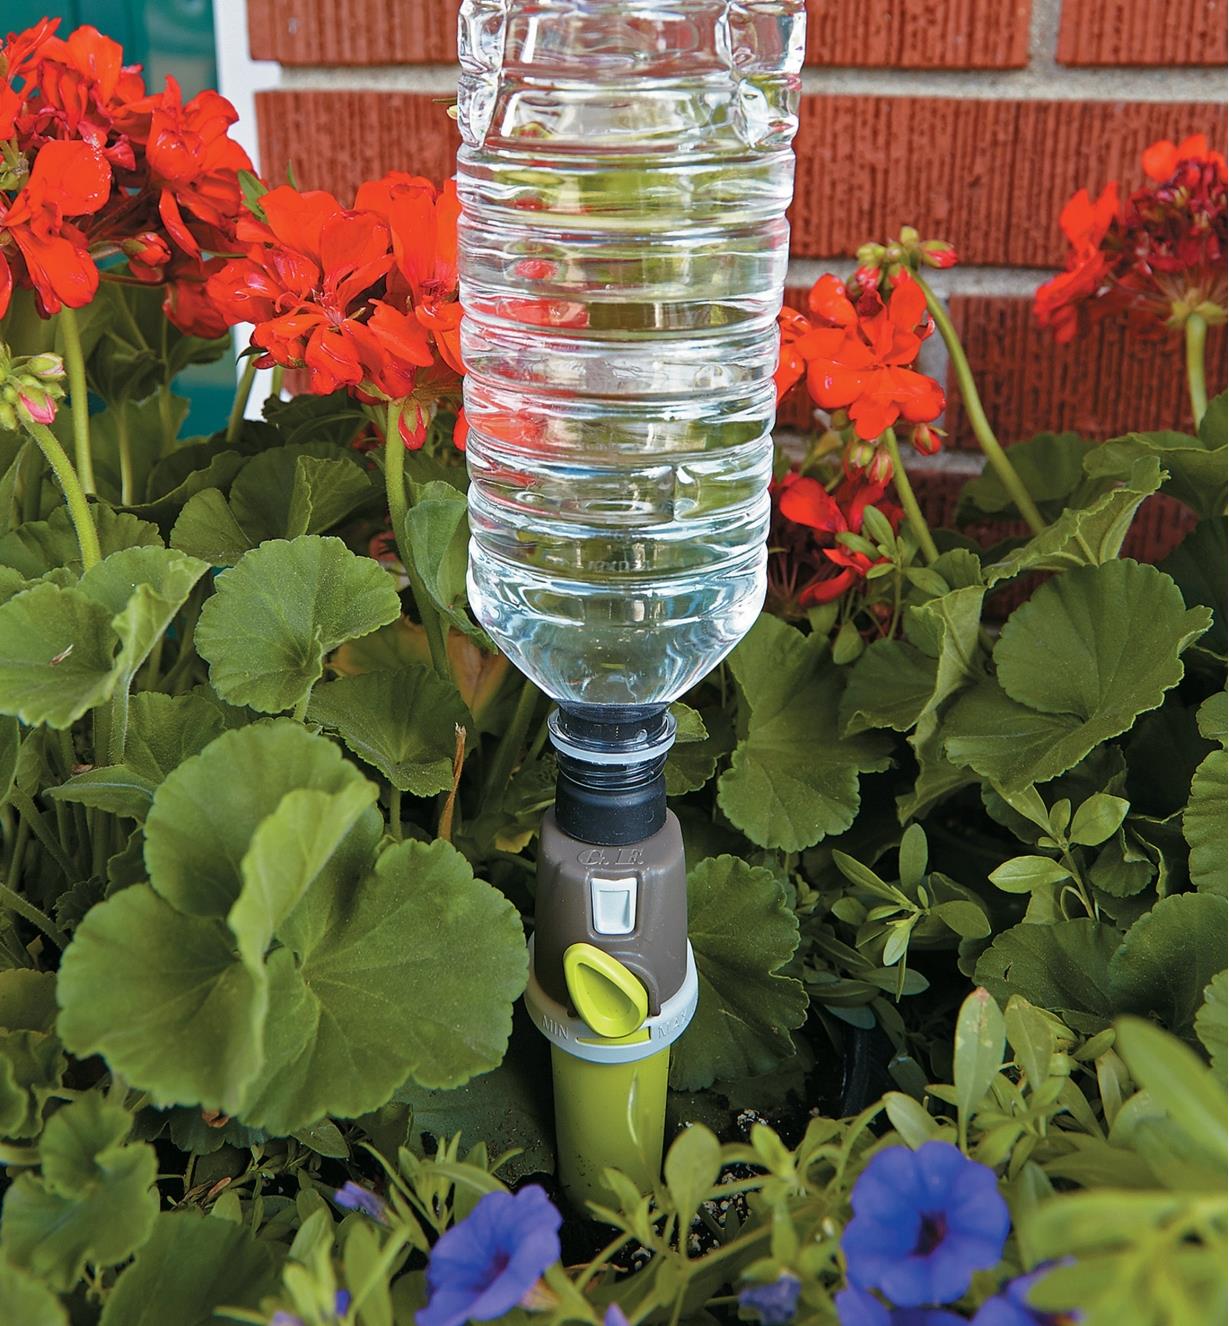 Adjustable-Flow Drip Spike with a plastic bottle attached inserted in a flower garden